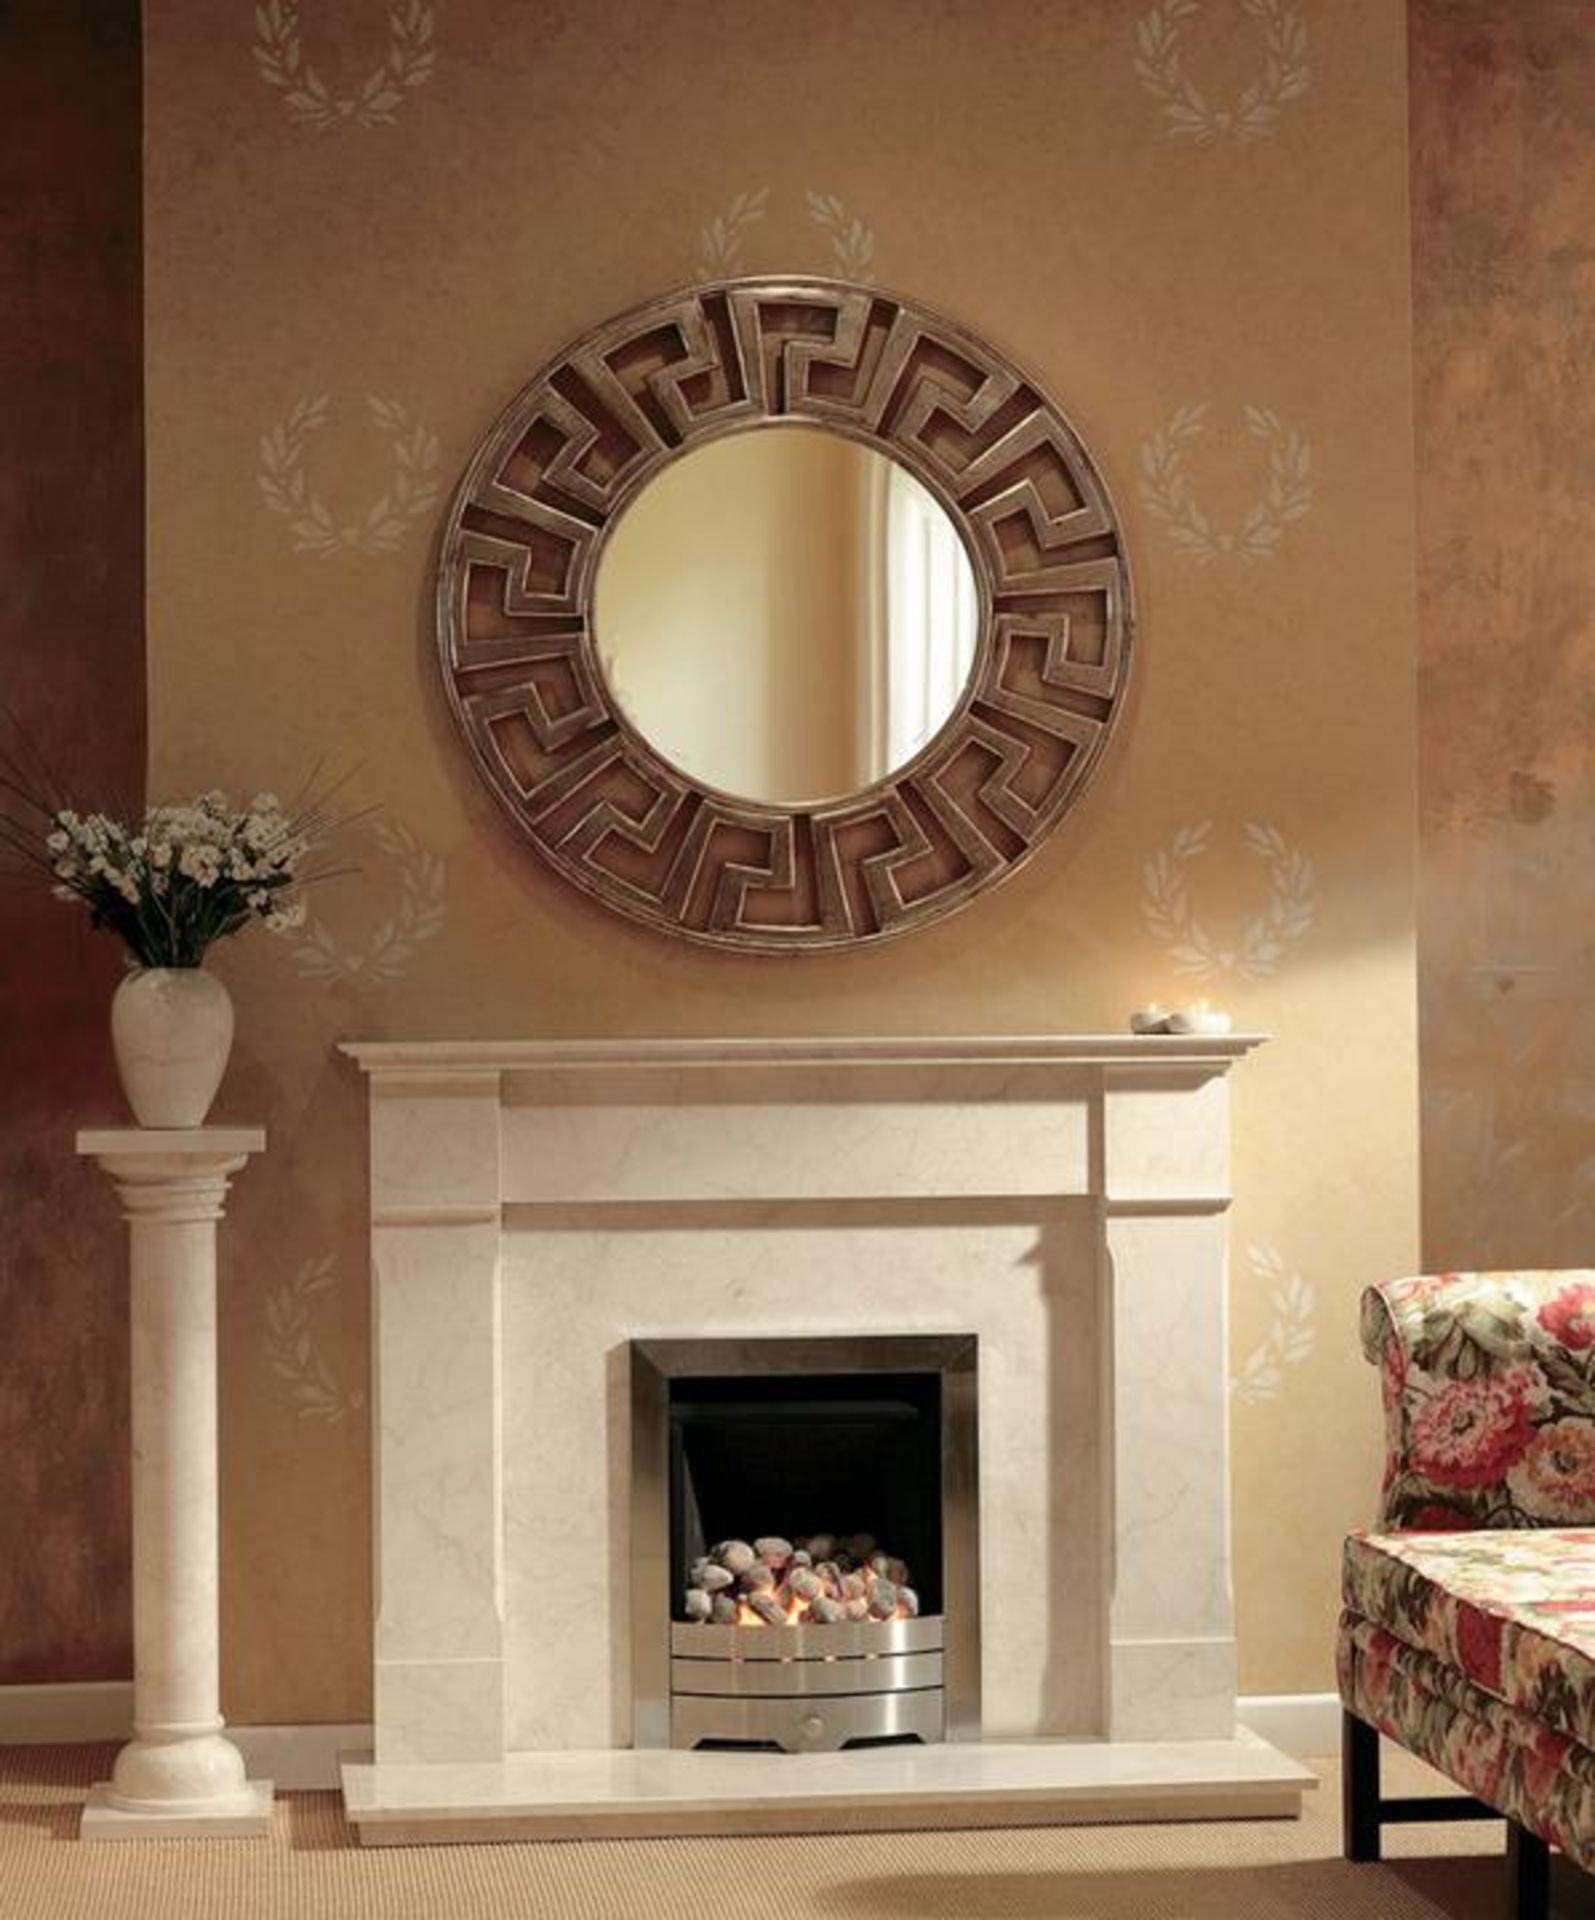 BRAND NEW MONTPELLIER FIRE SURROUND, EVITA 48 INCH CRÈME CLASSICO, The Evita fireplace is our take